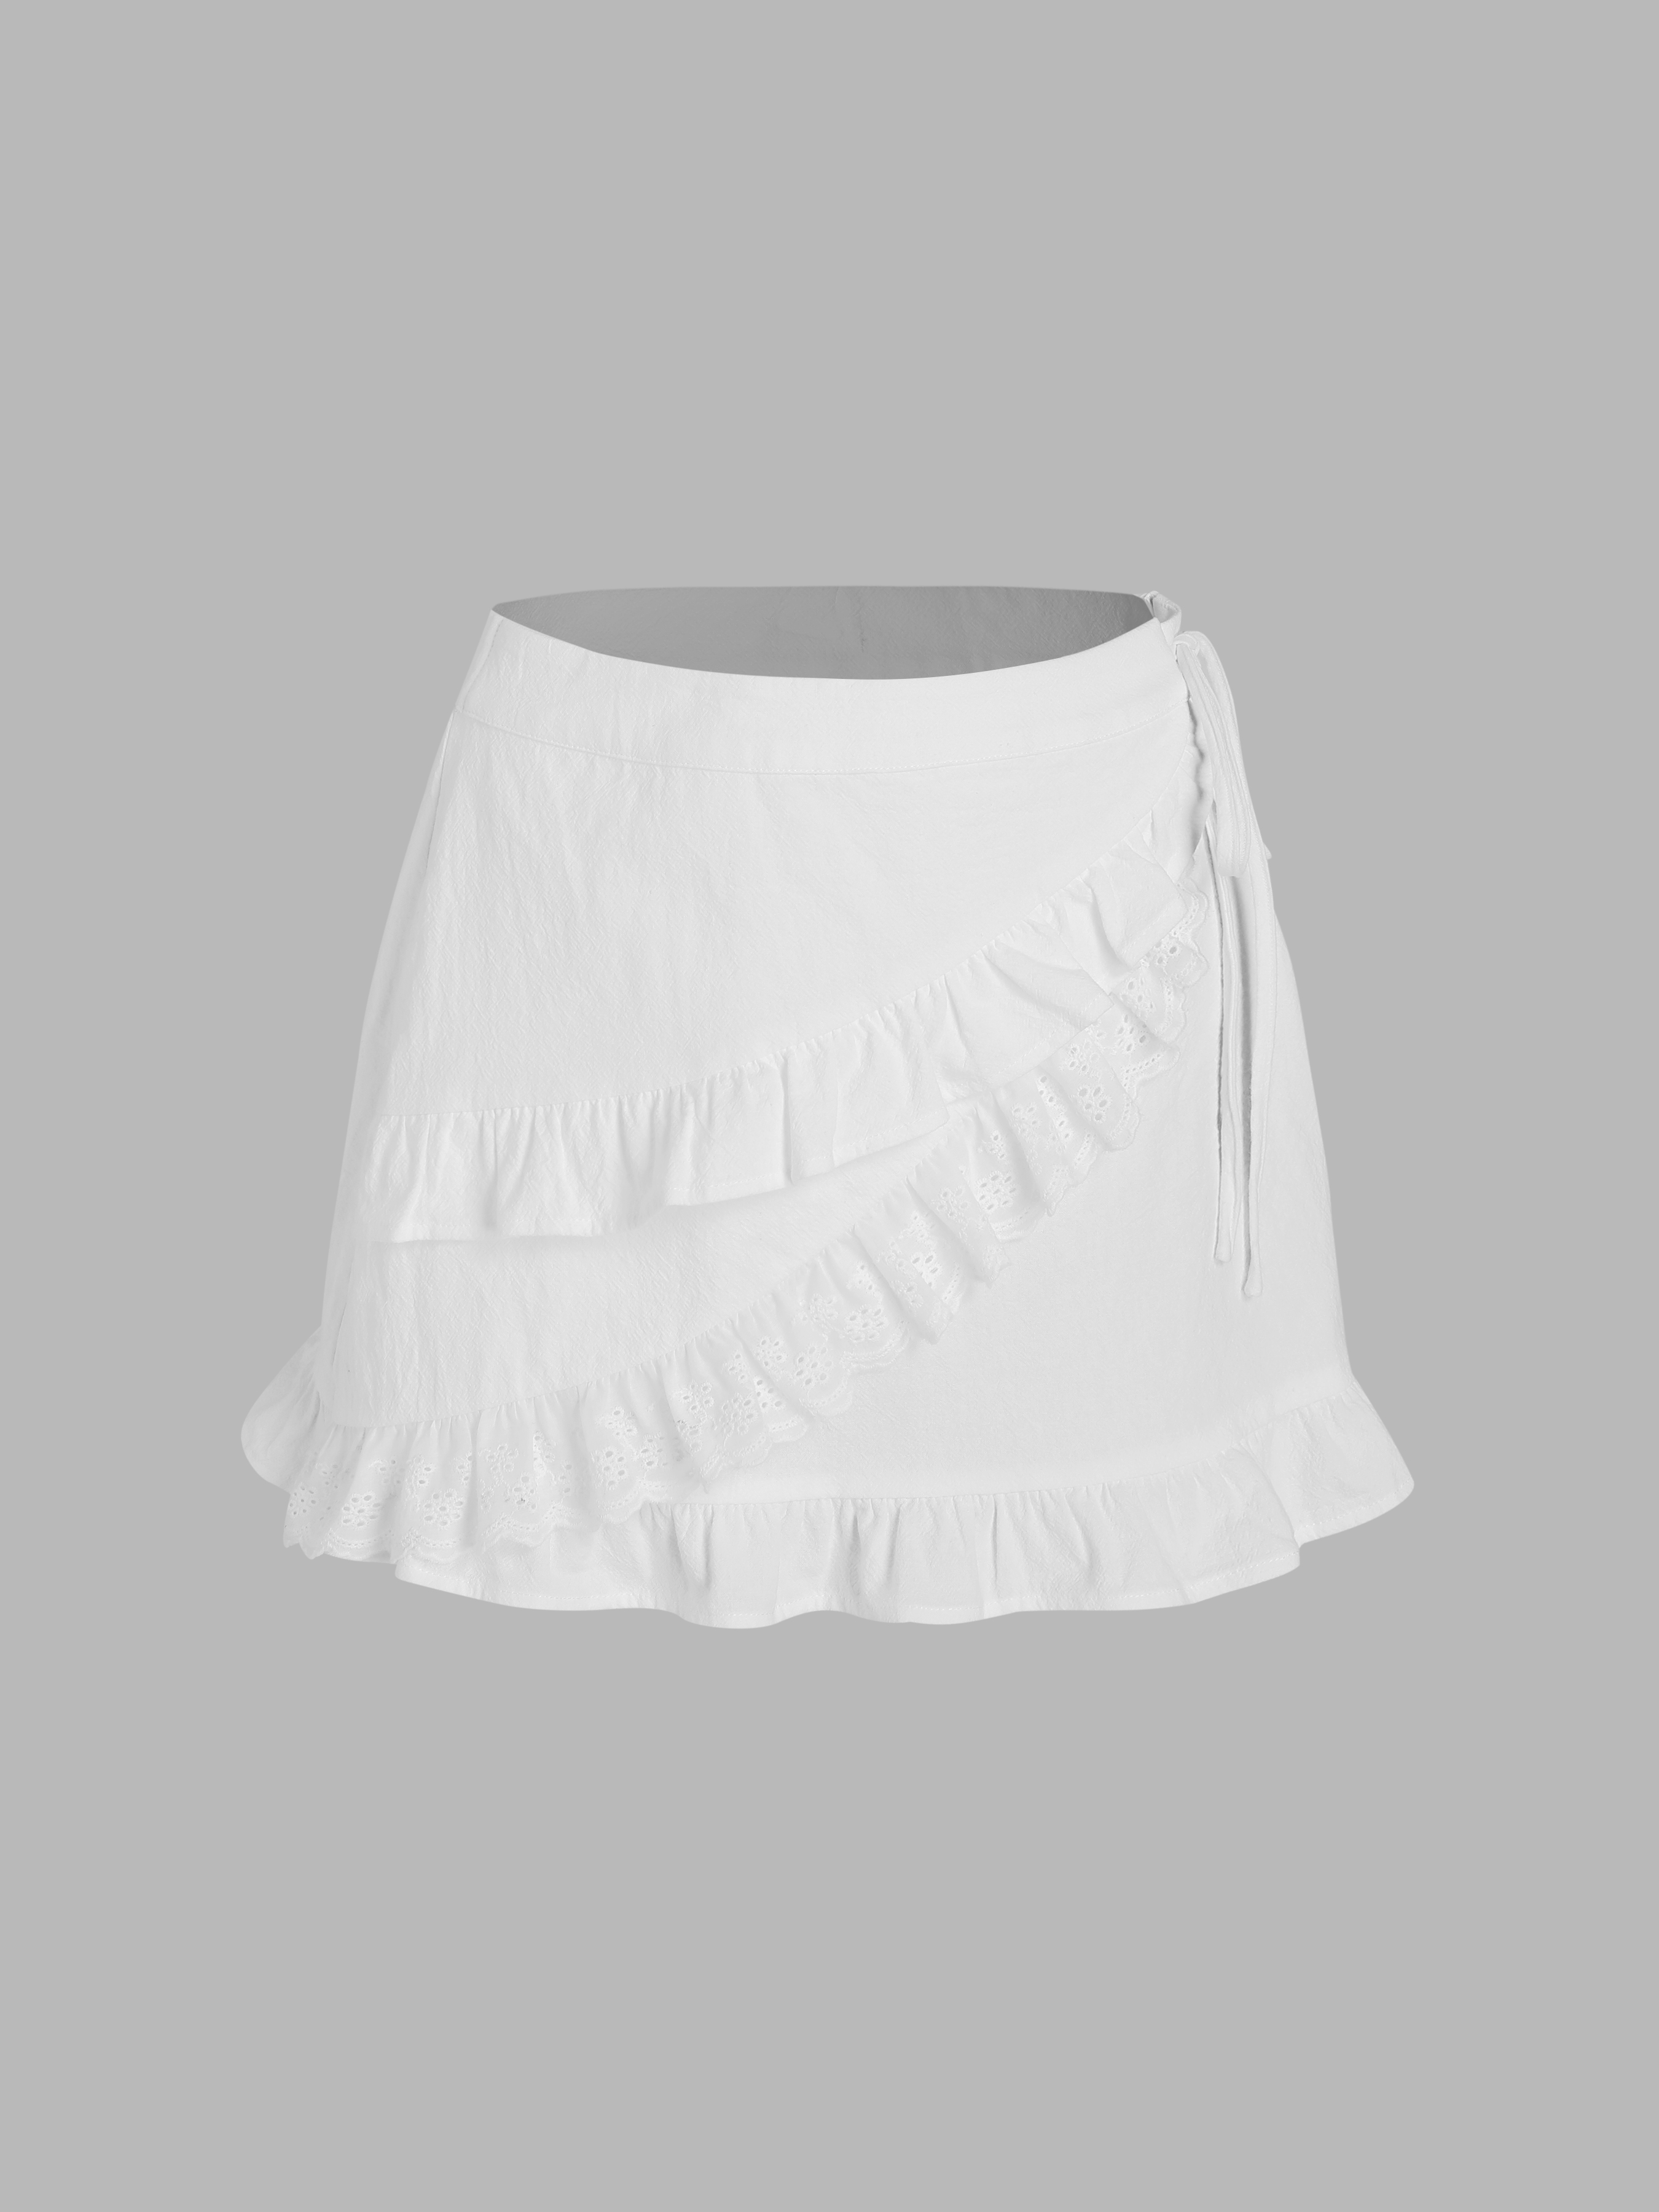 Wrap Lace Trim Knotted Mini Skirt